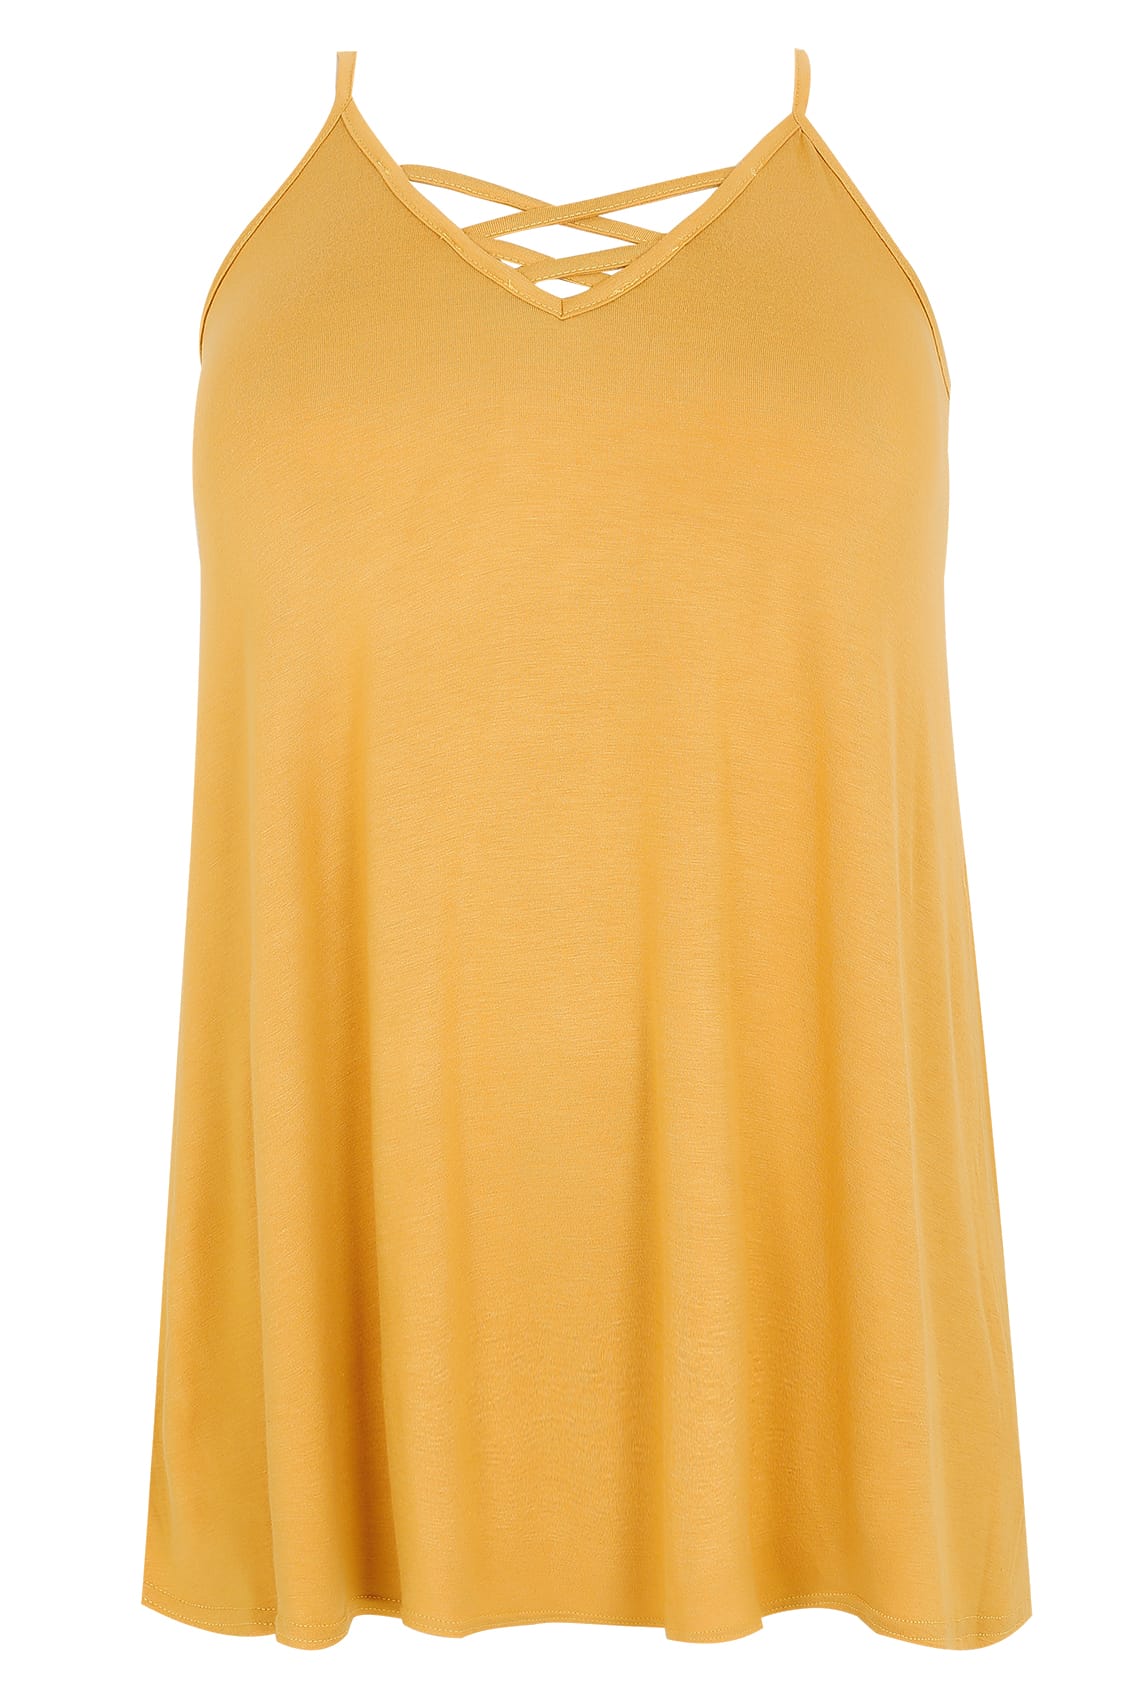 Mustard Yellow V-Neck Cami Vest Top With Cross Front Detail, Plus size ...